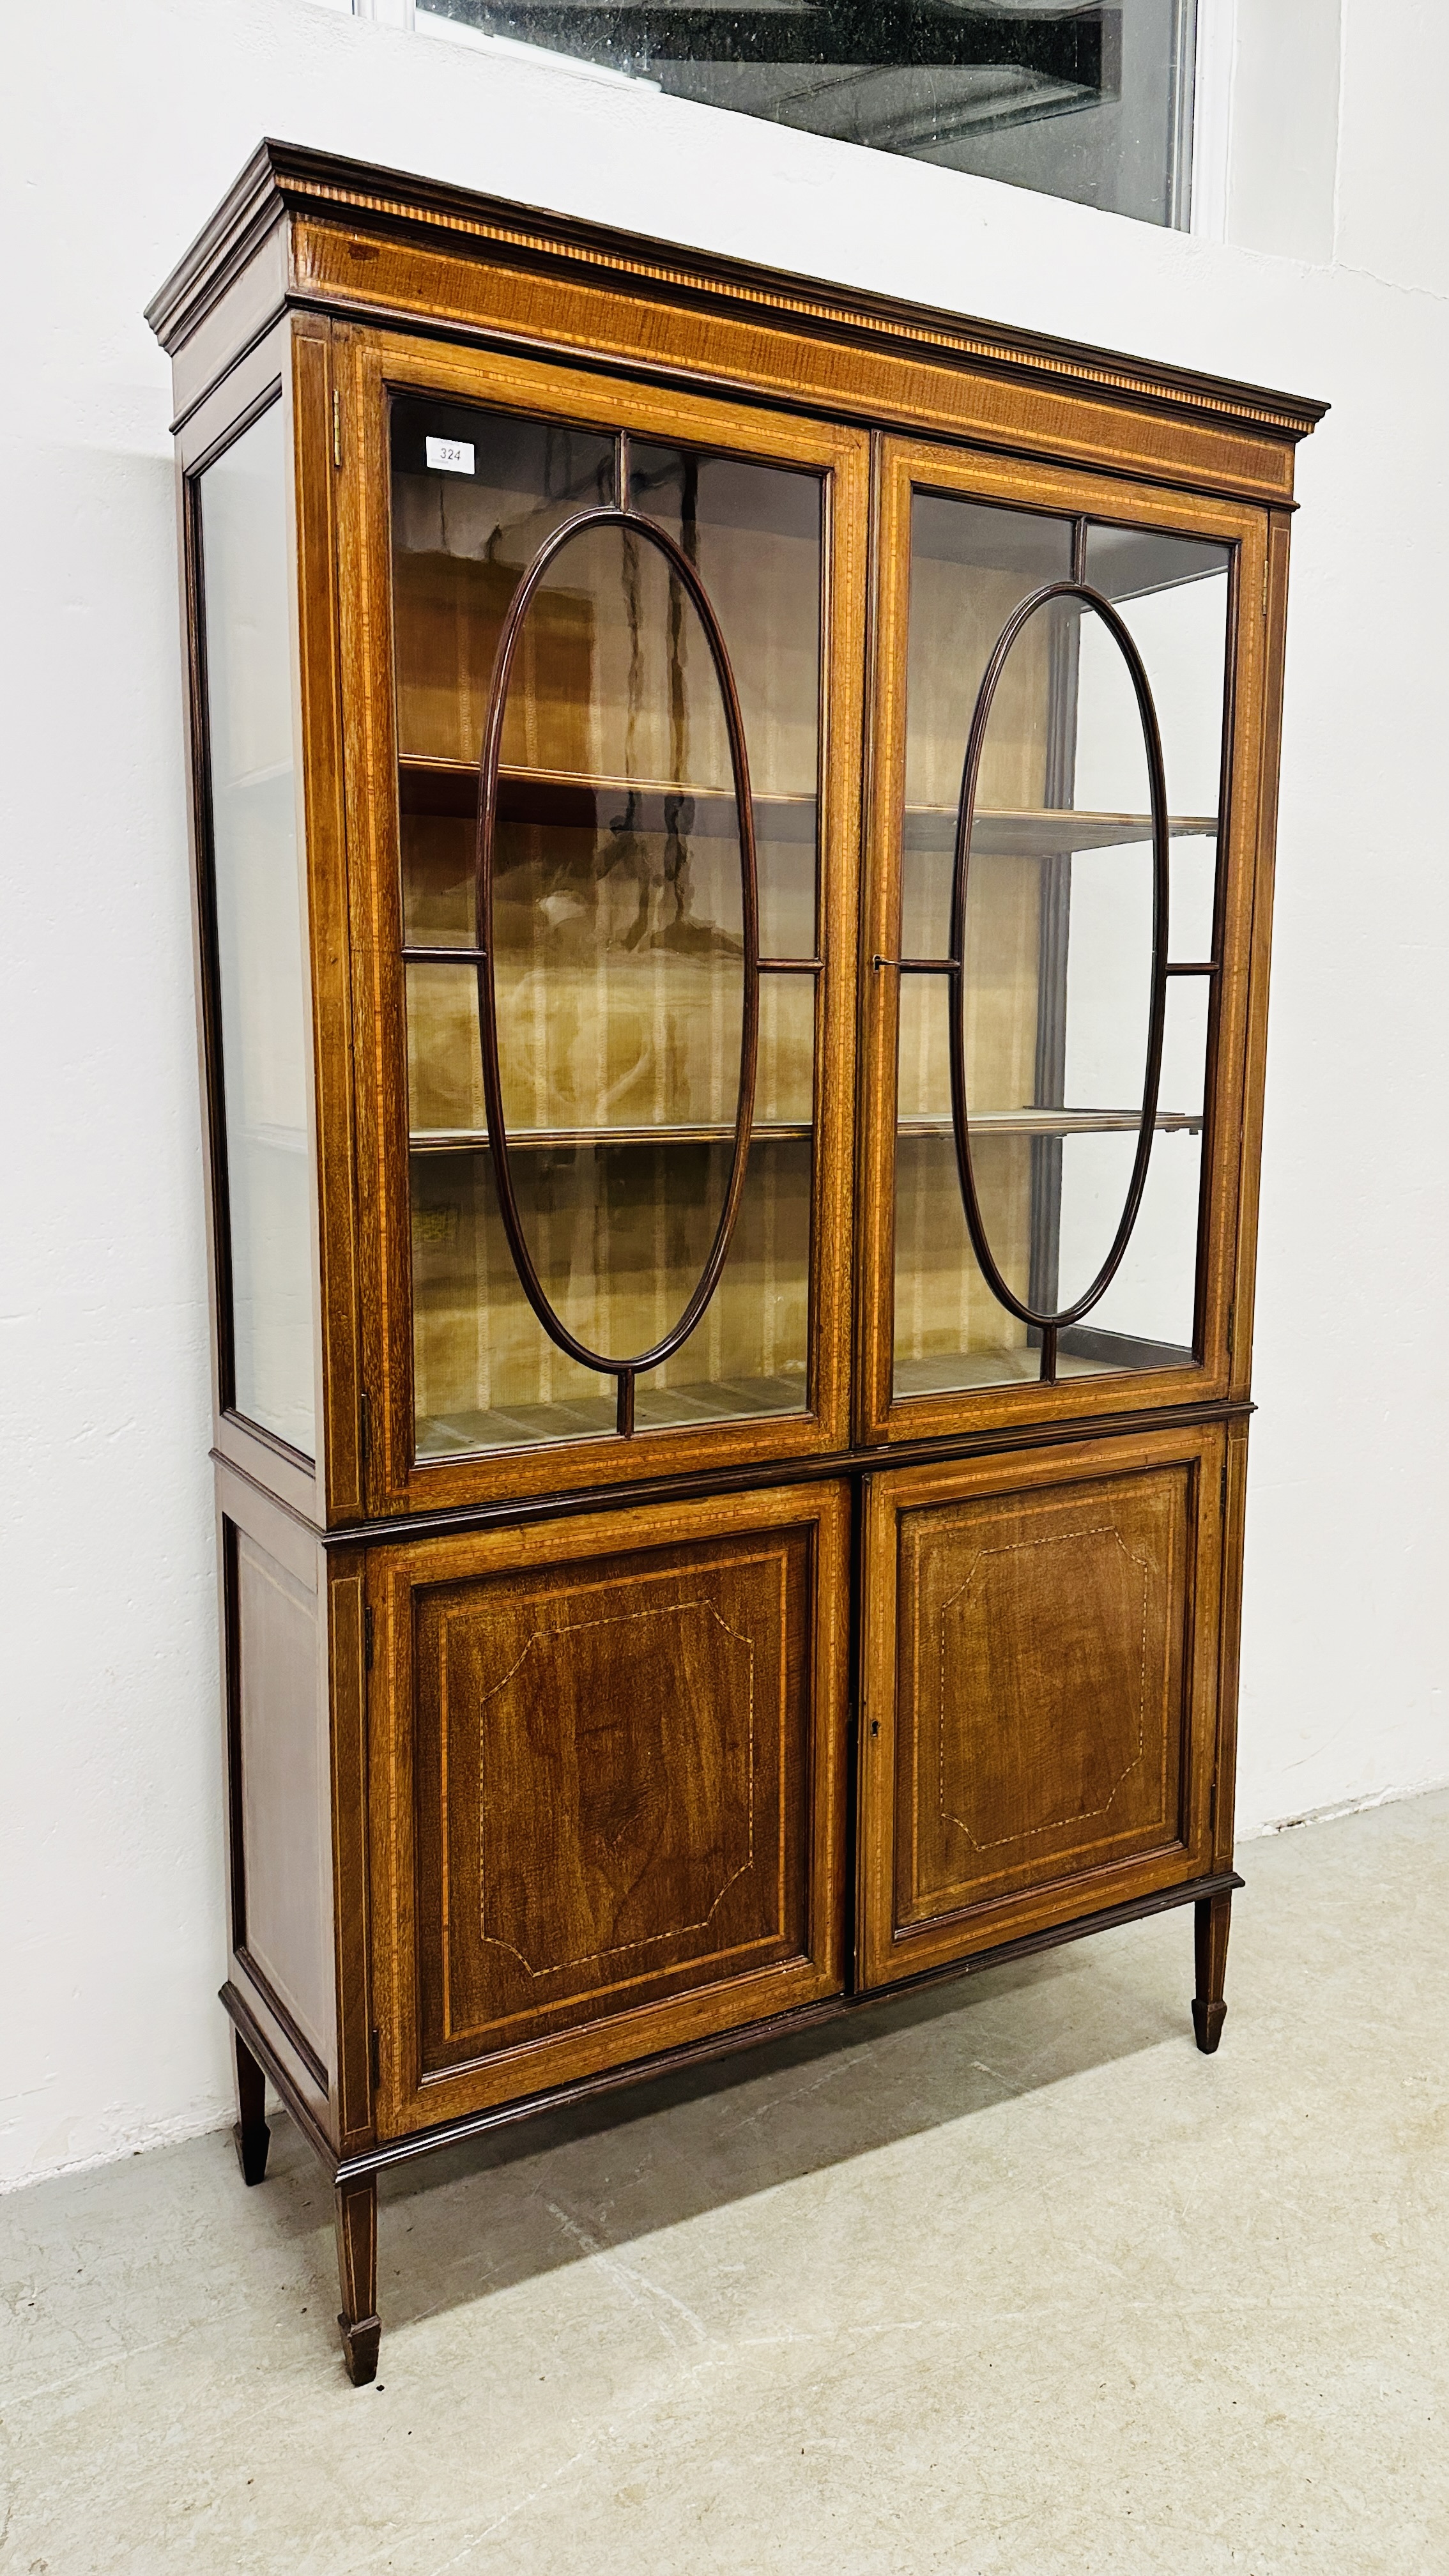 AN EDWARDIAN MAHOGANY TWO DOOR DISPLAY CABINET WITH CROSS BANDED INLAY AND TWO DOOR CUPBOARD BASE - - Image 2 of 10